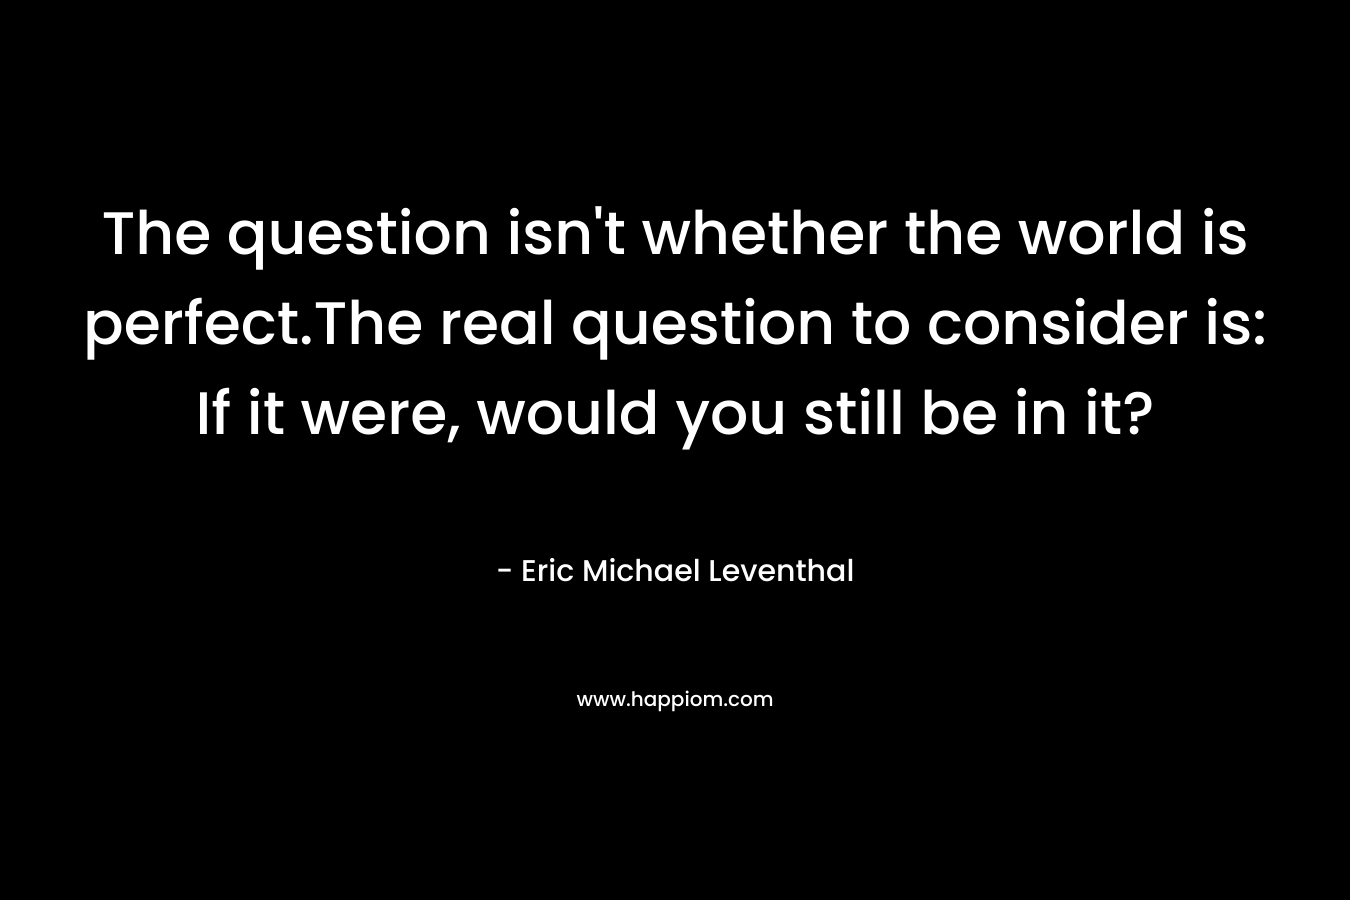 The question isn't whether the world is perfect.The real question to consider is: If it were, would you still be in it?